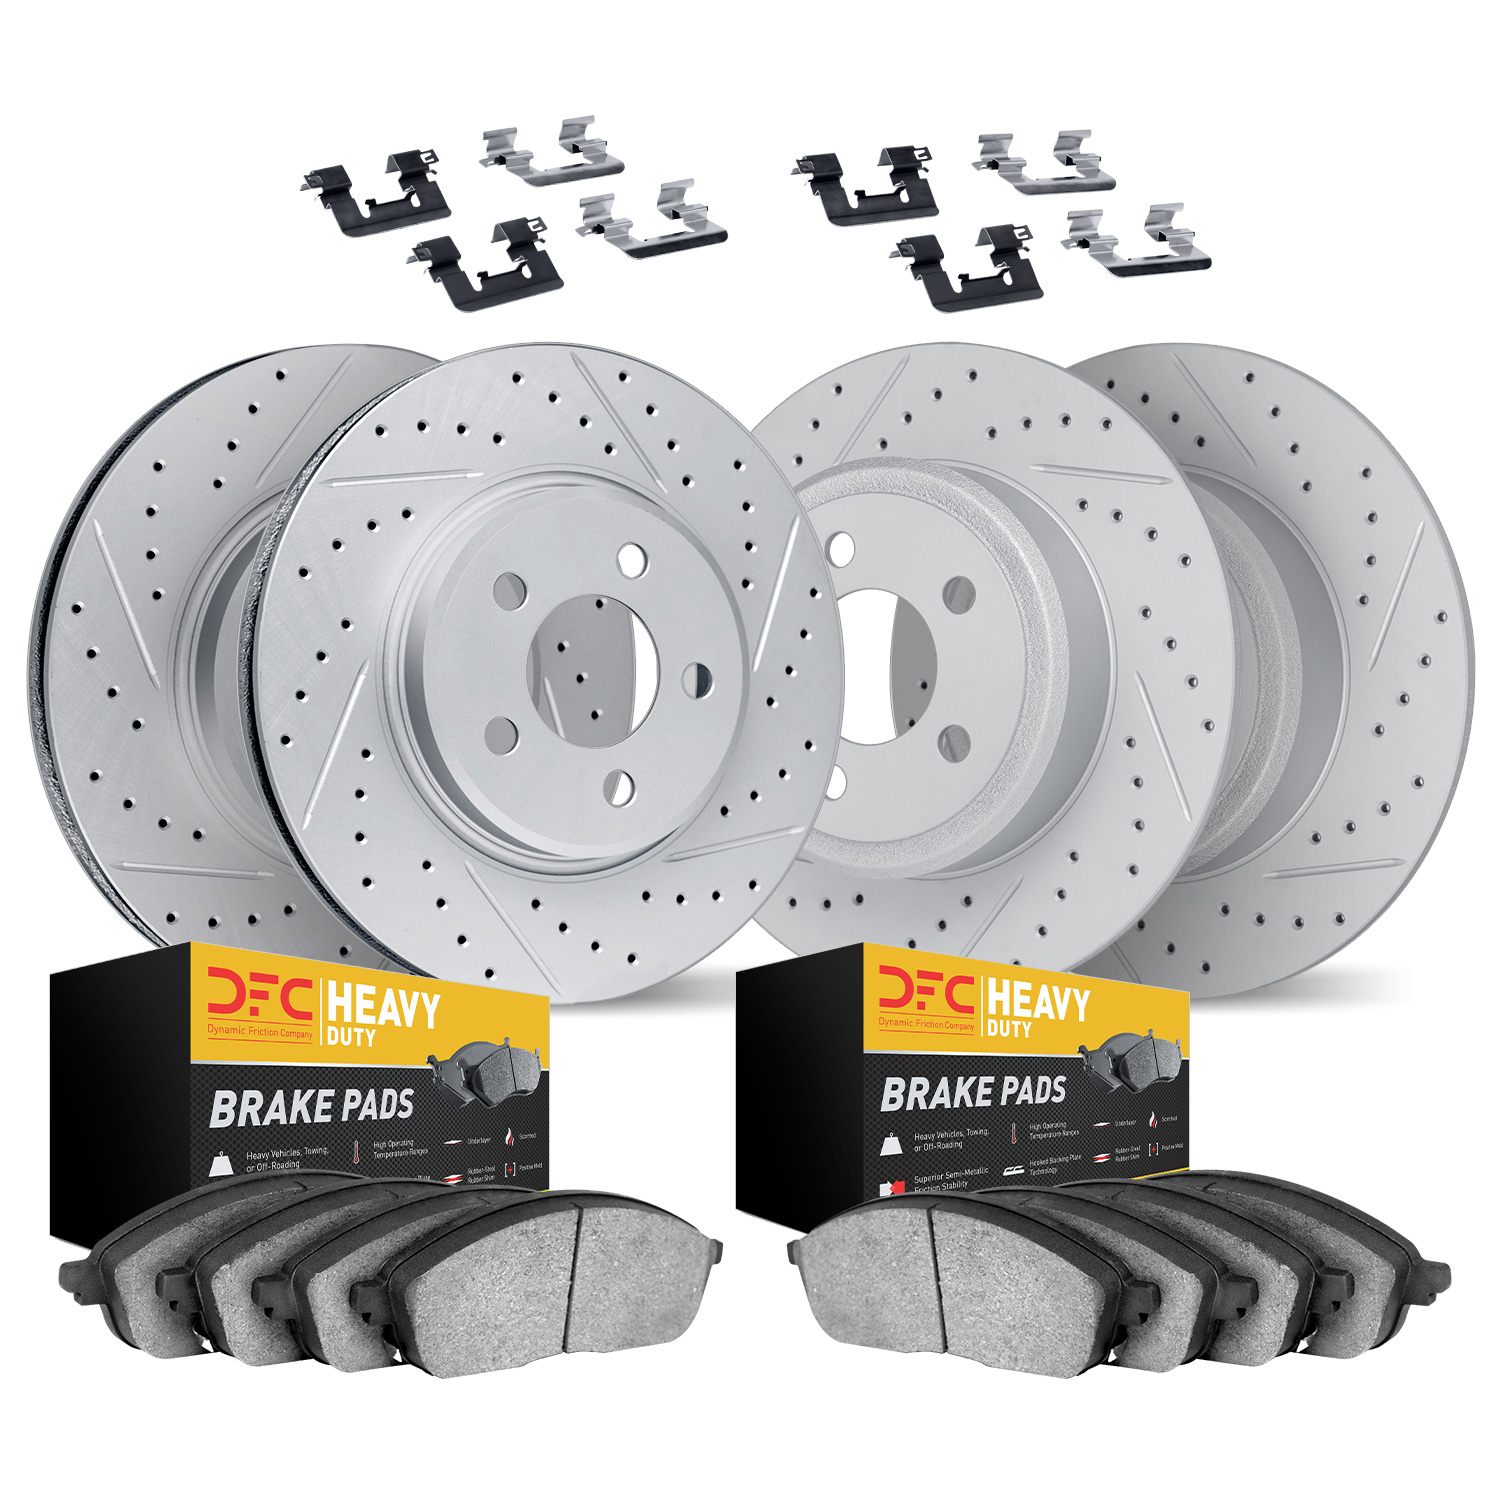 2214-99040 Geoperformance Drilled/Slotted Rotors w/Heavy-Duty Pads Kit & Hardware, 2001-2002 Ford/Lincoln/Mercury/Mazda, Positio